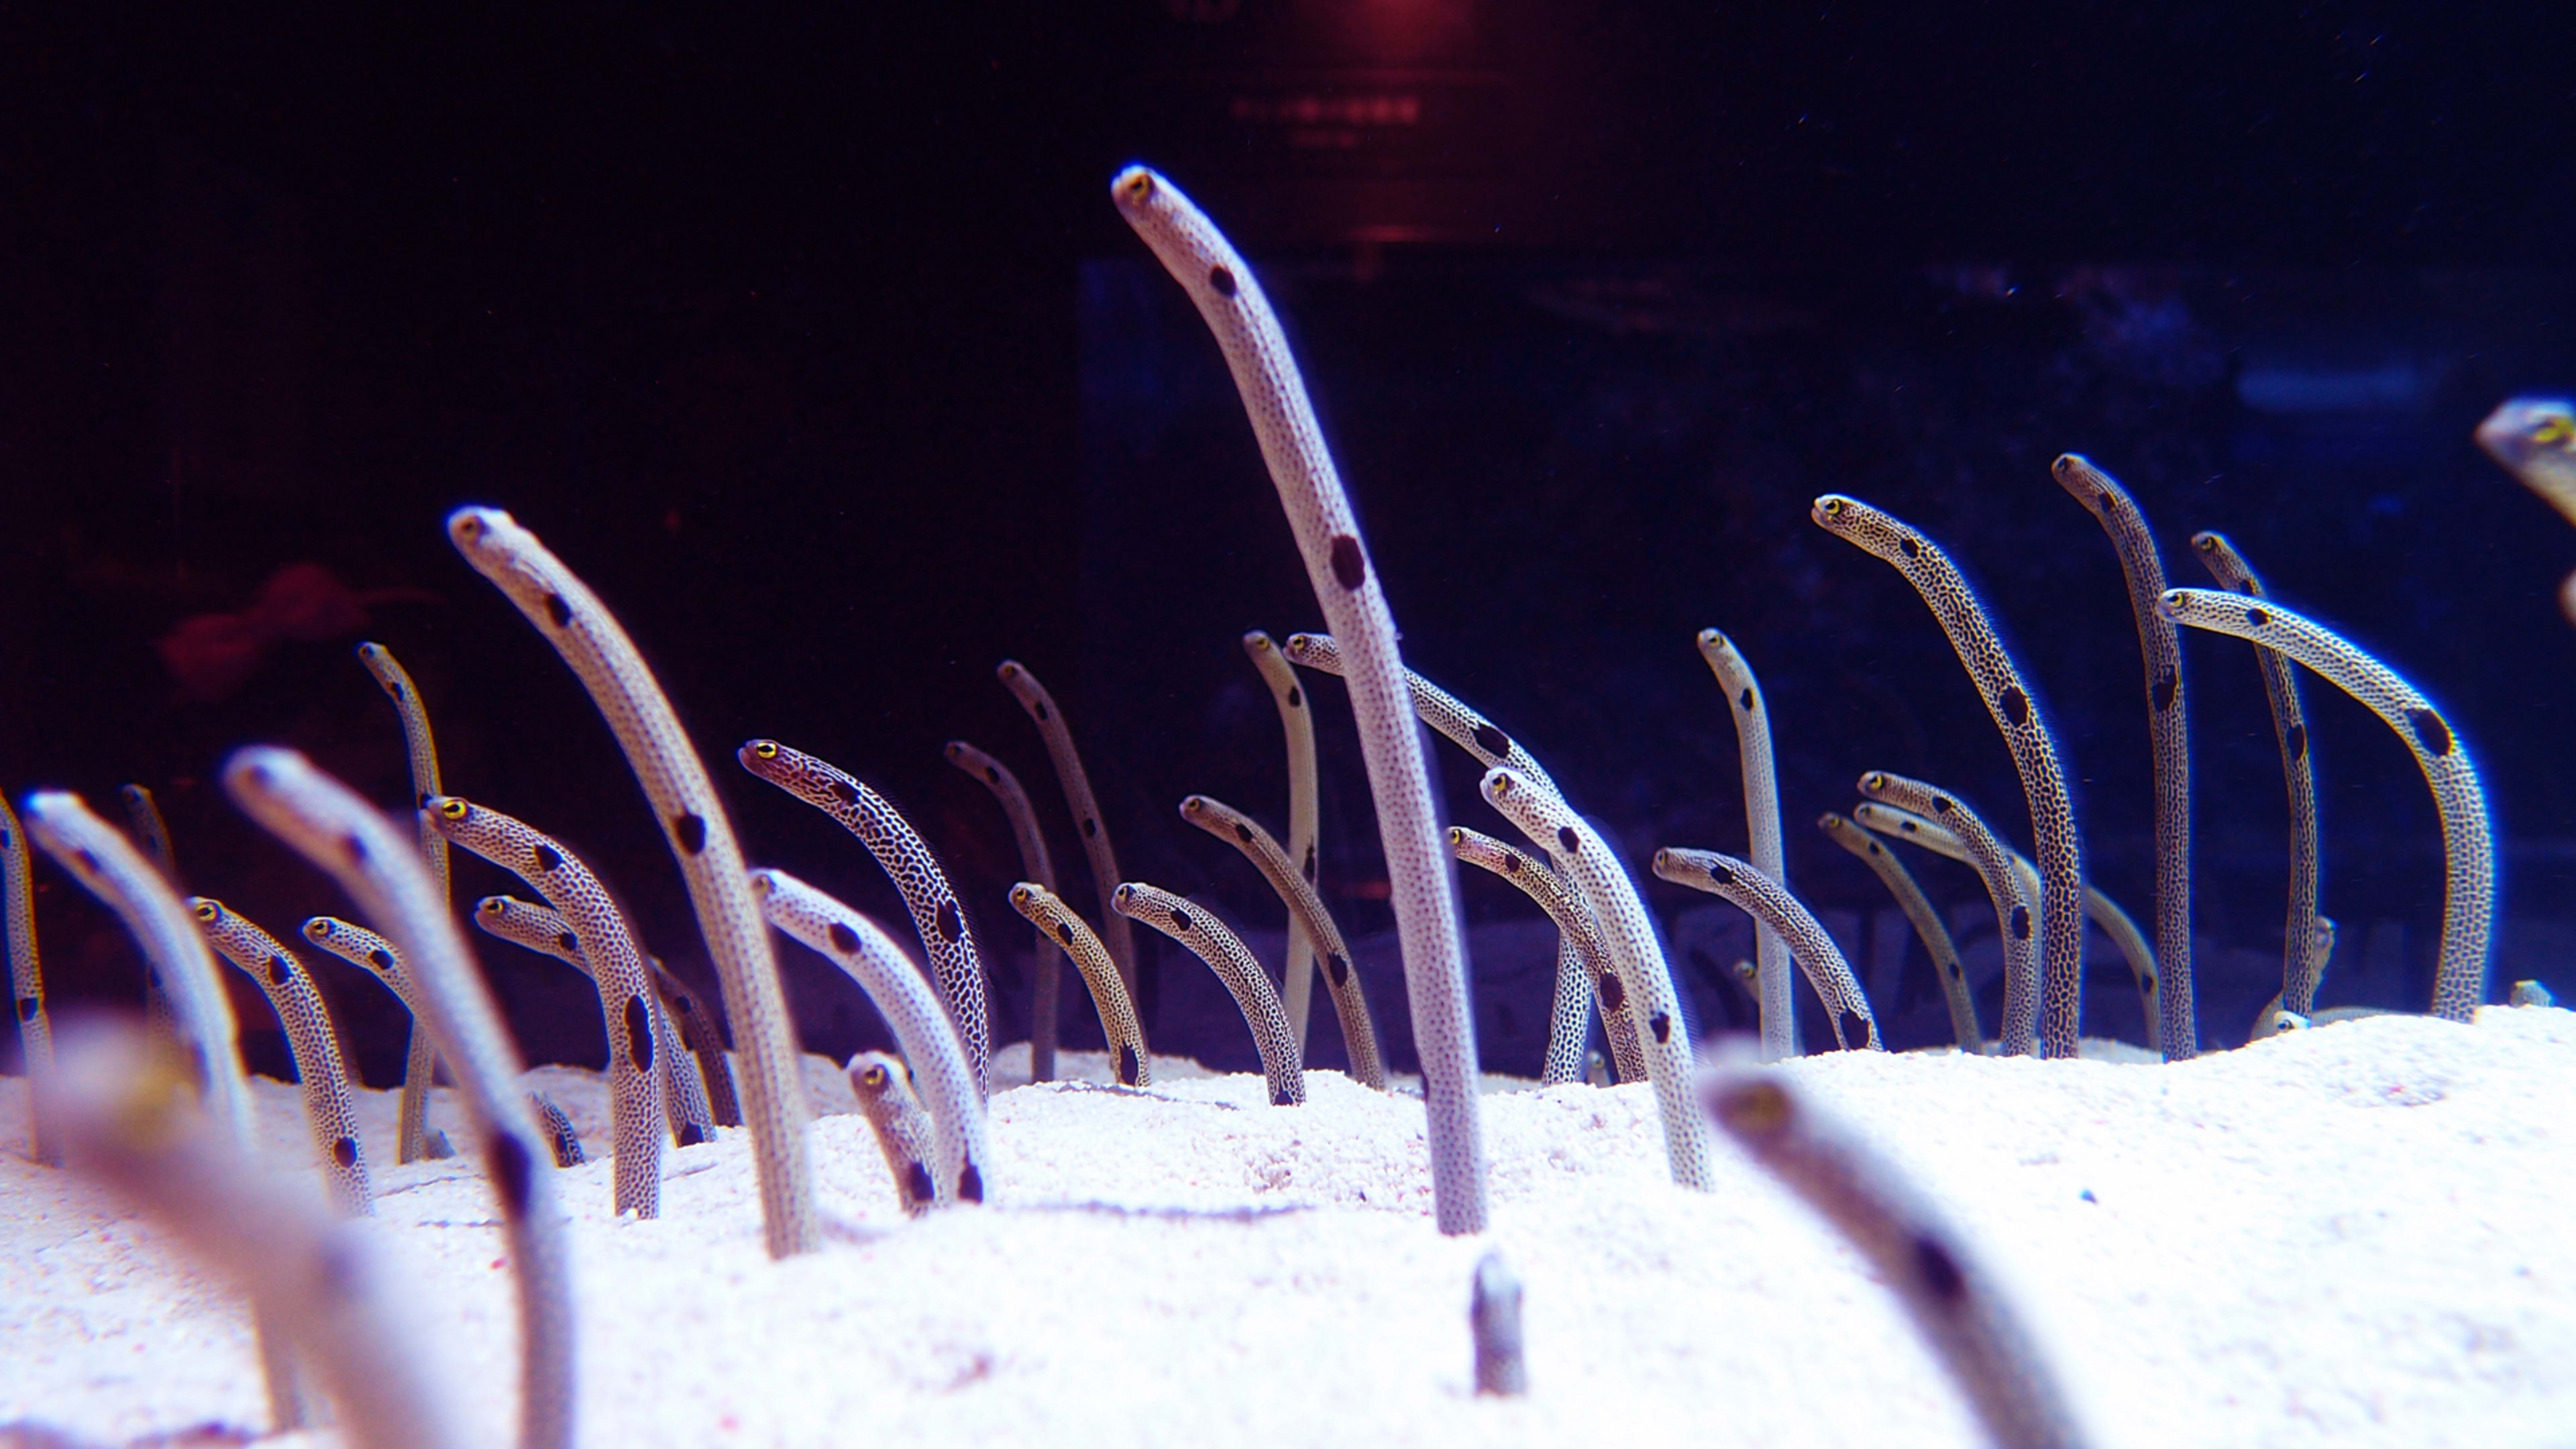 The lockdown has eels missing people too. This Tokyo aquarium wants you to FaceTime them